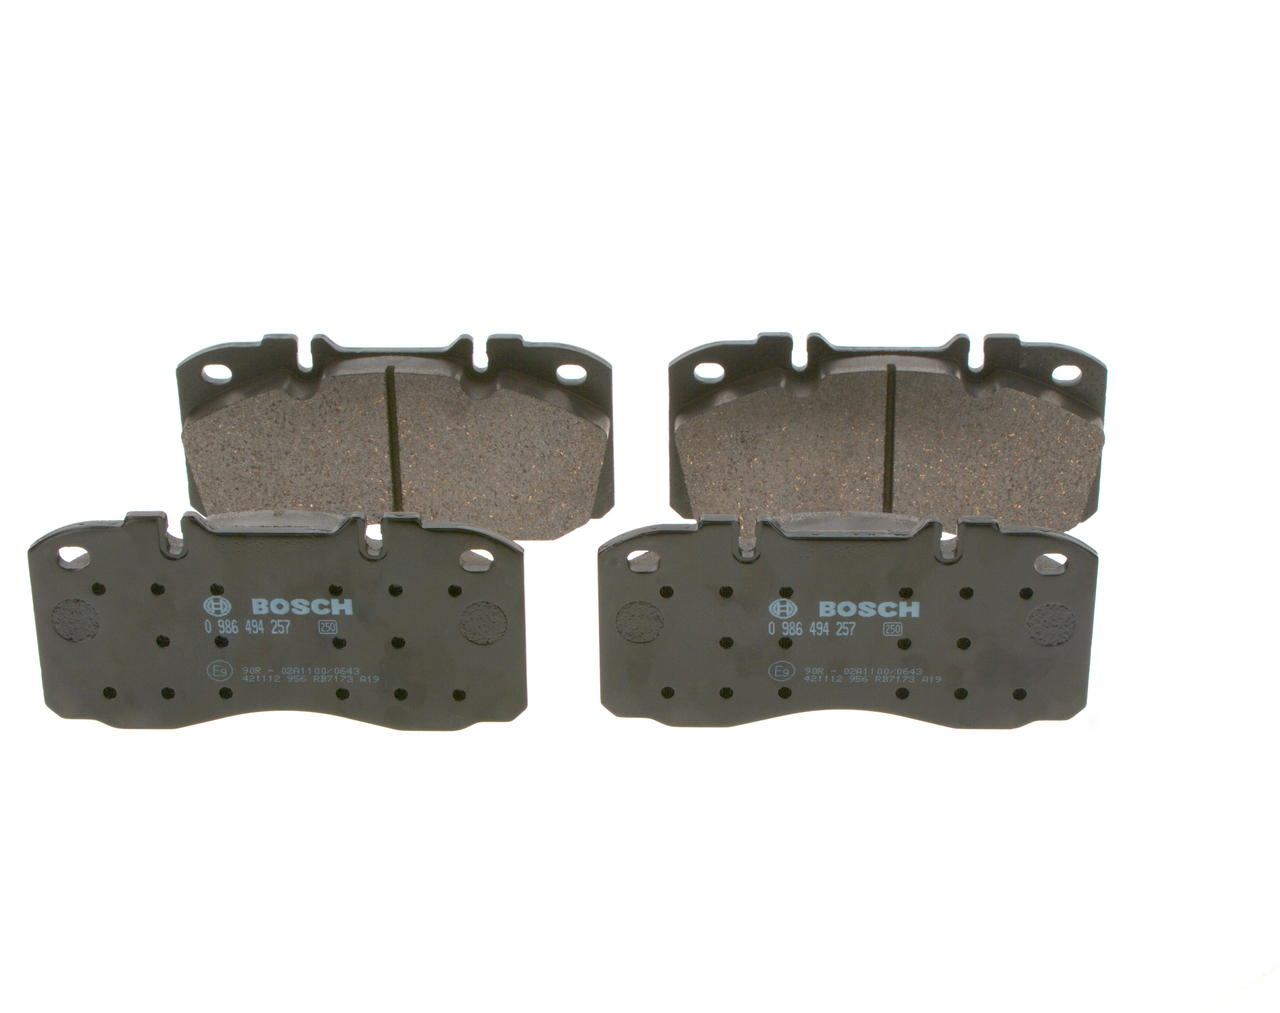 BOSCH 0 986 494 257 Iveco Daily 2008 Disk brake pads